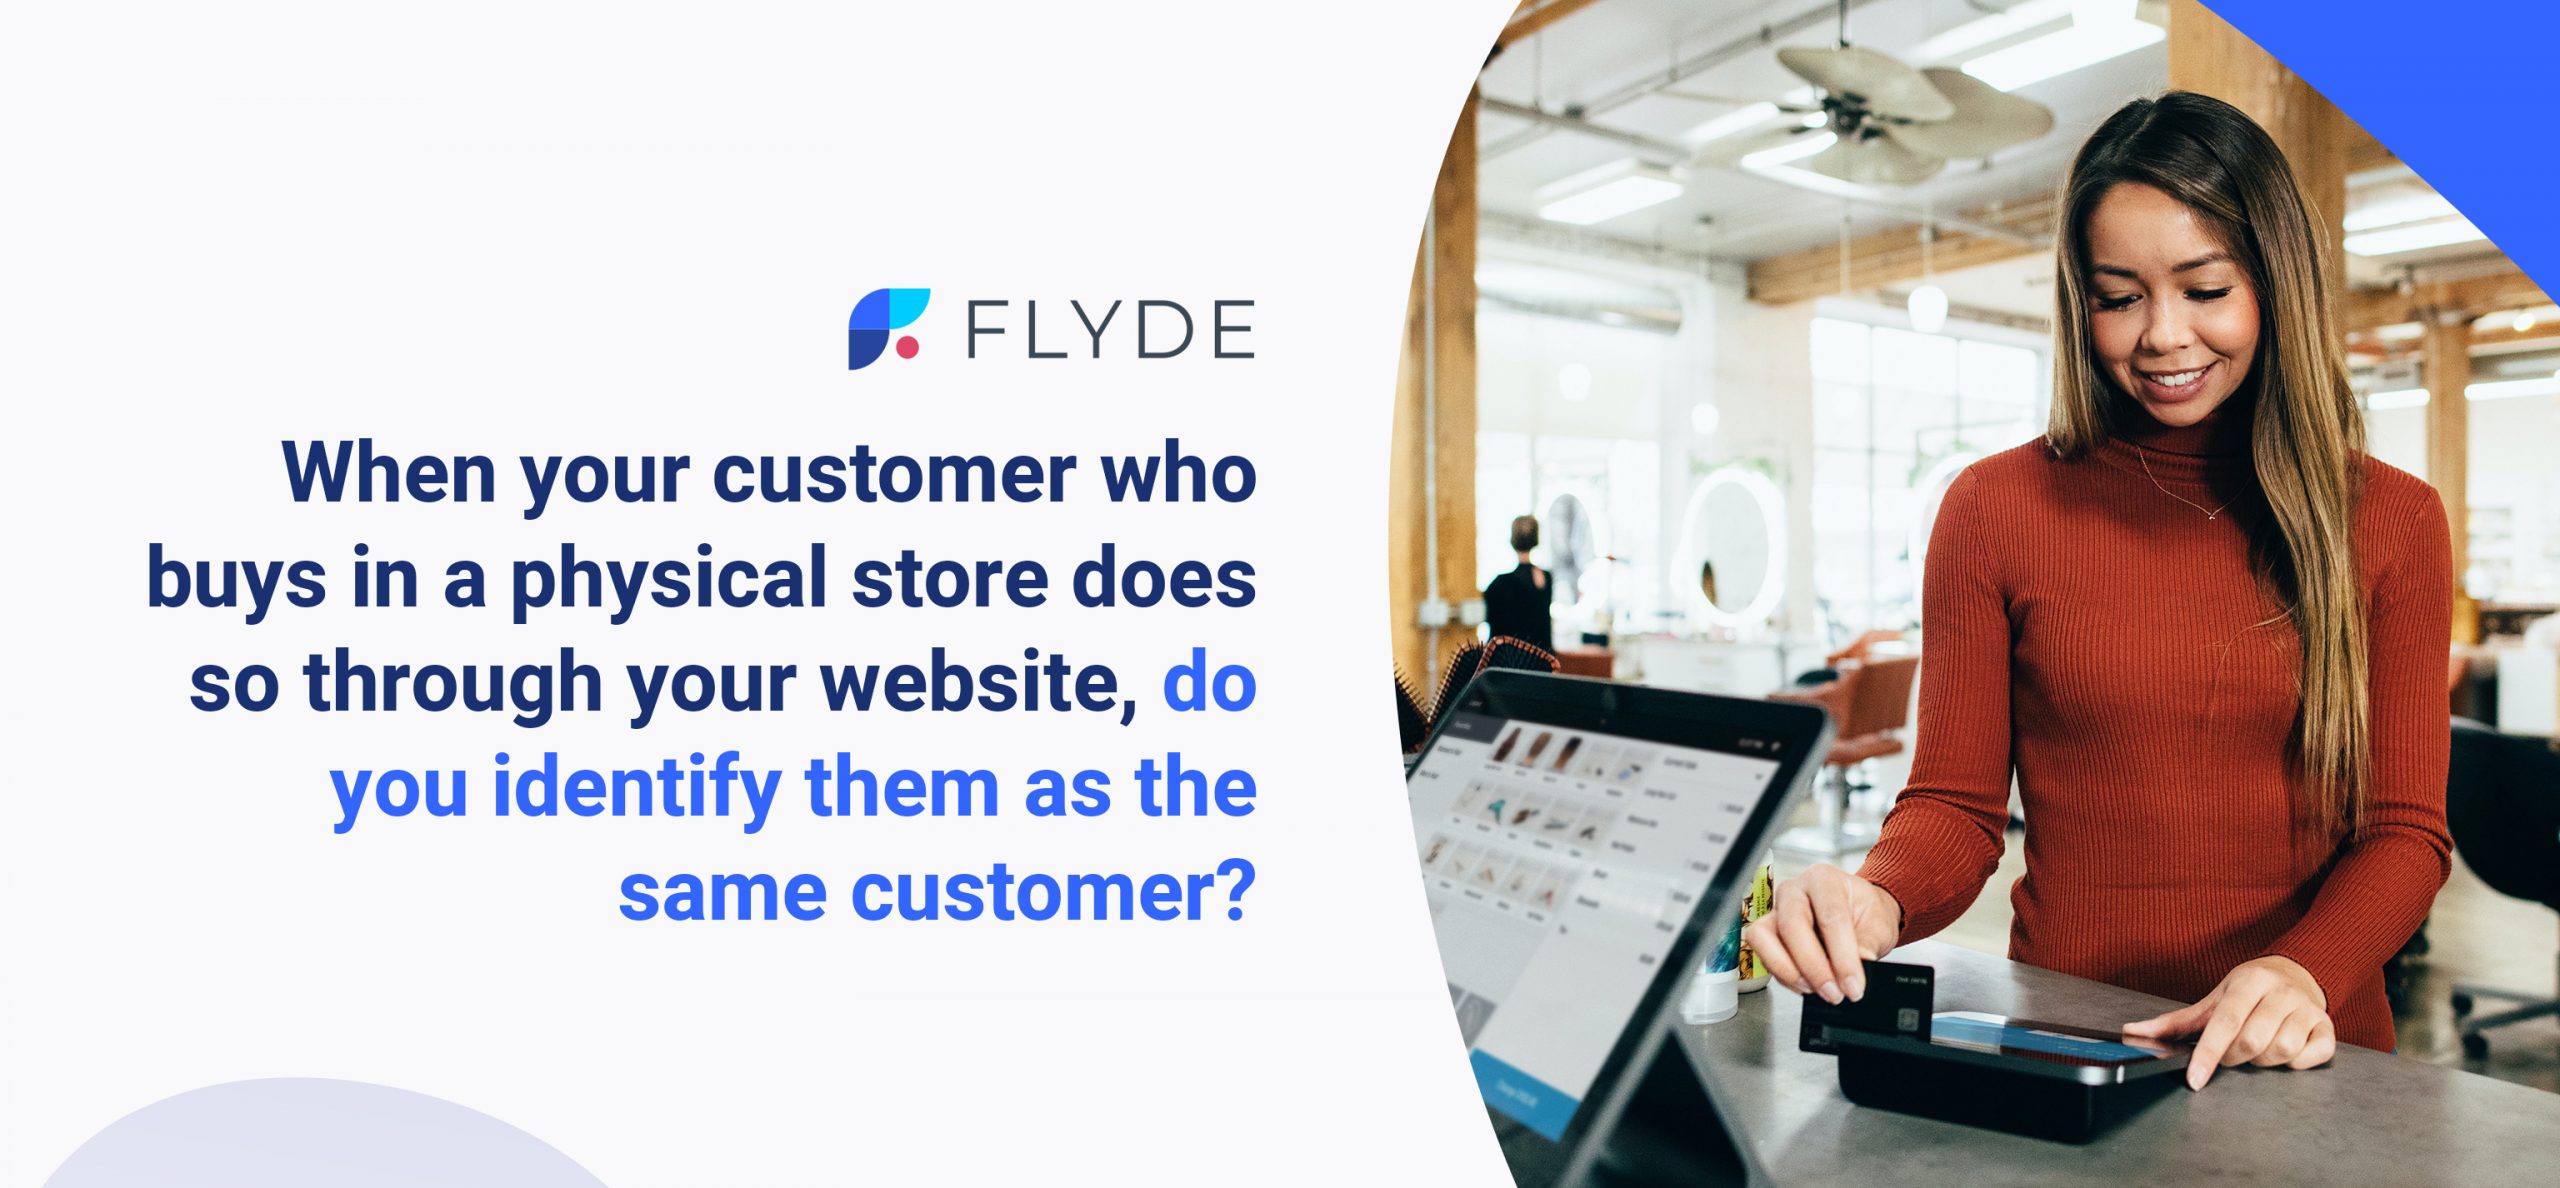 When your customer who buys in a physical stores does so through your website, do you identify them as the same customer?